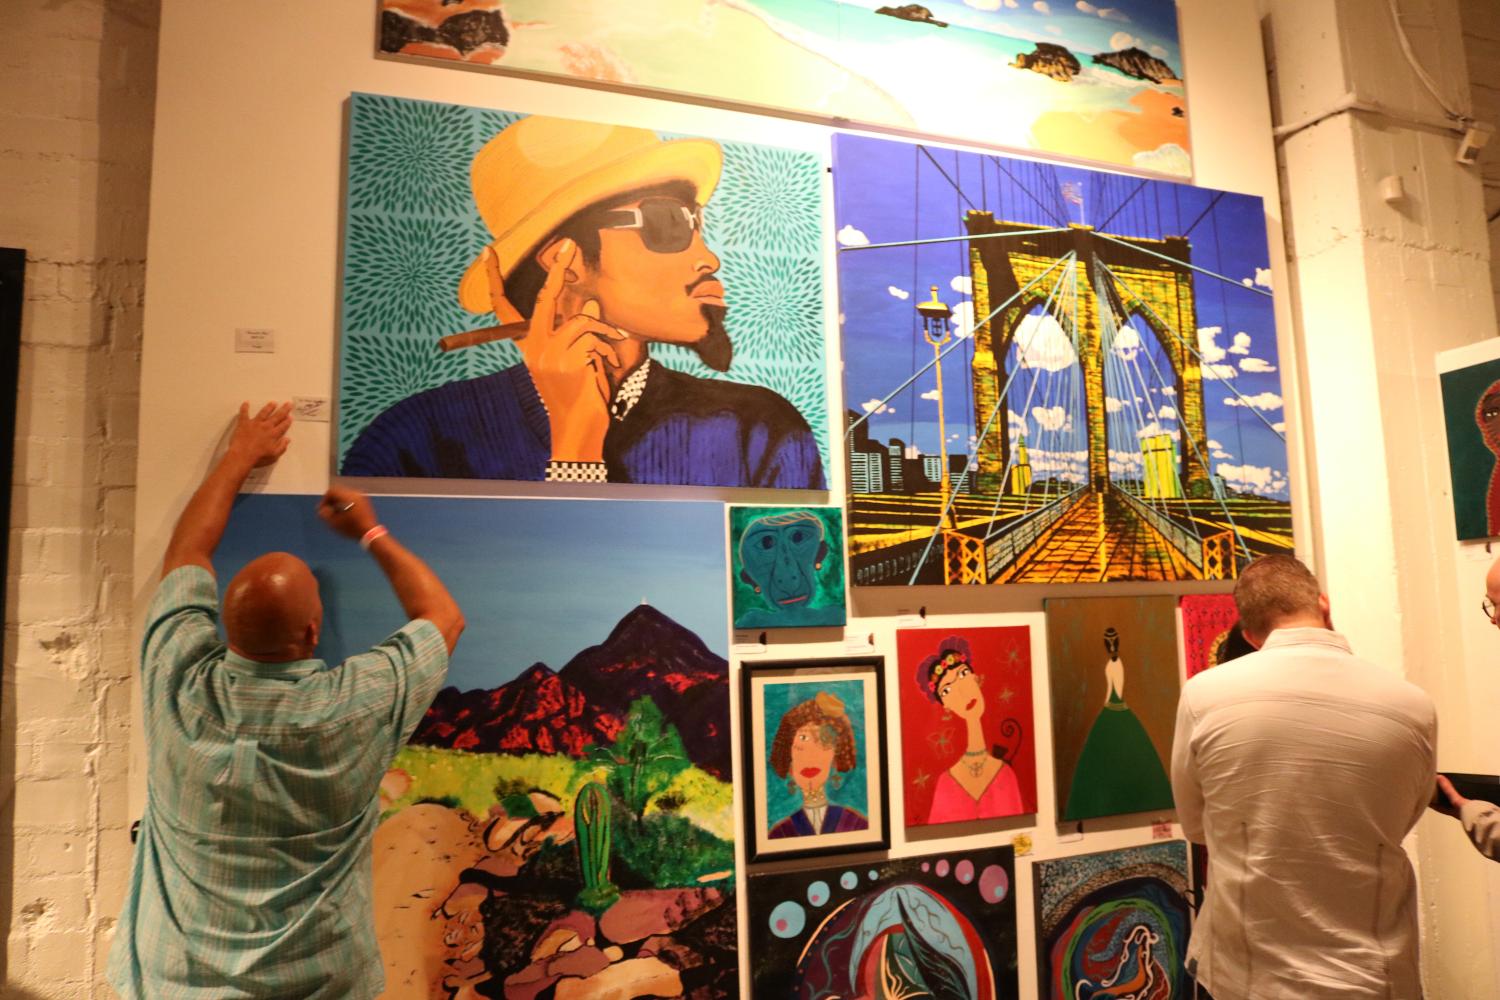 Artwork on display at the Chocolate and Art Show on Sept. 14. The painting top left is the Andre 3000 that was sold later in the show.